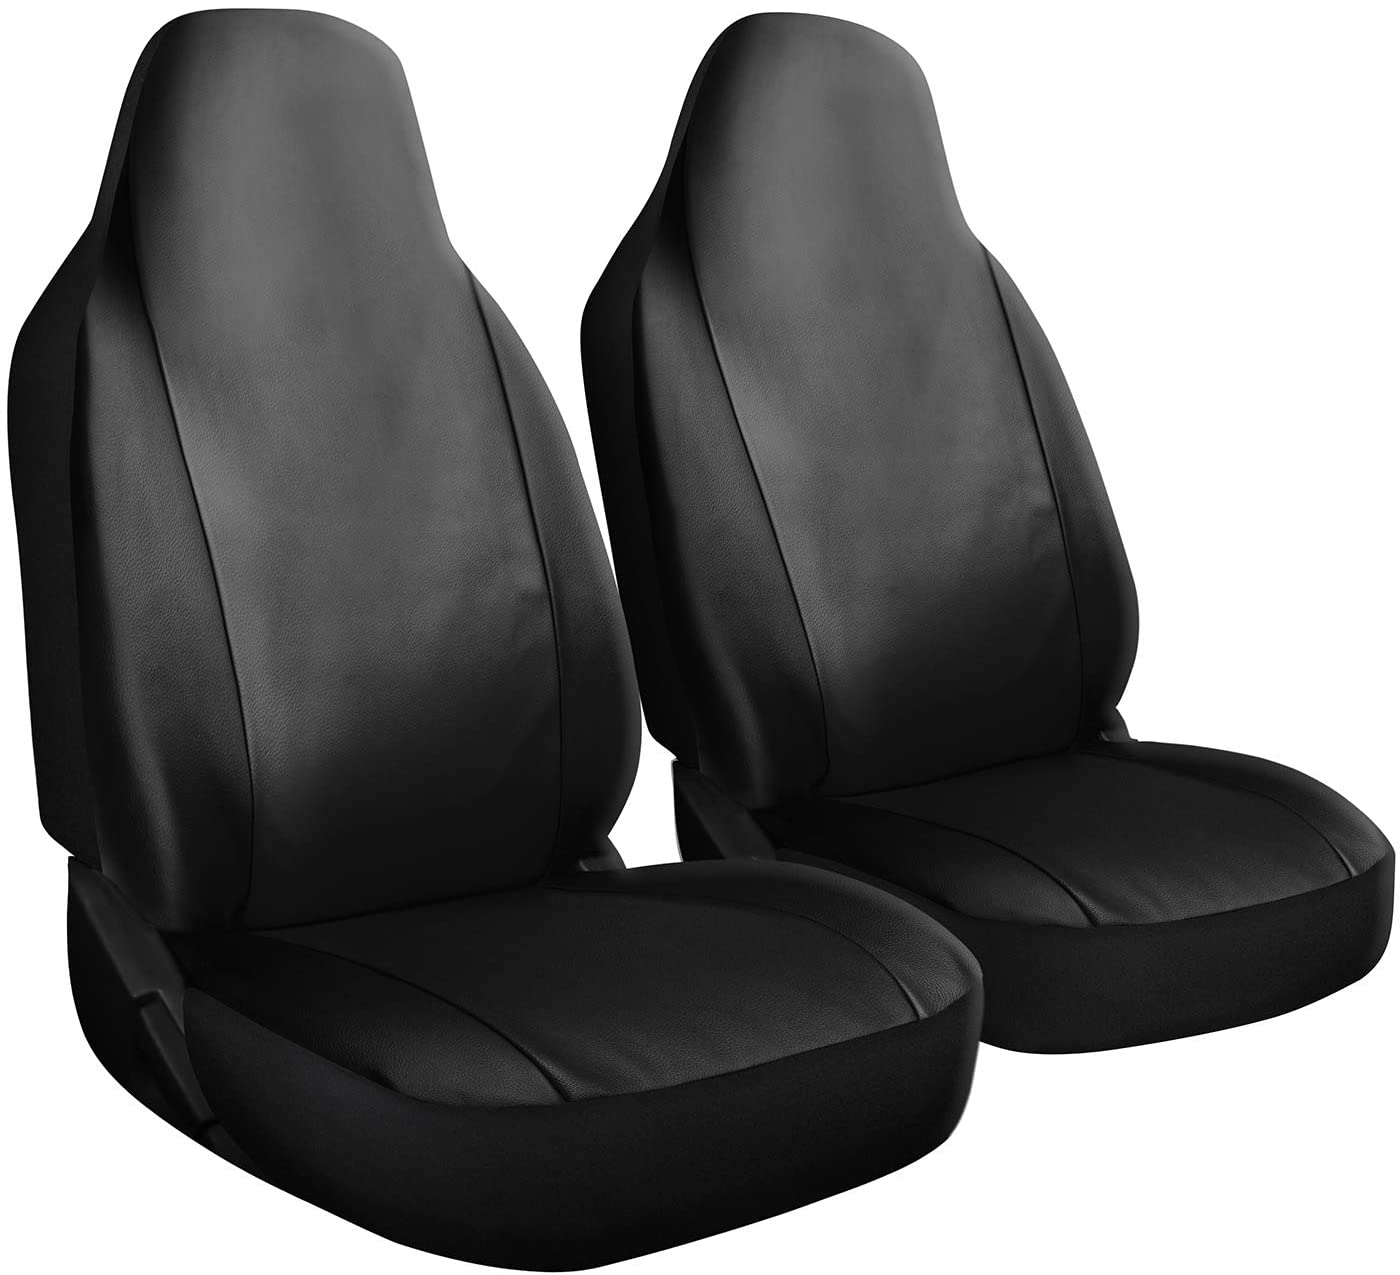 OxGord Car Seat Cover - PU Leather Solid Black with Front Low Bucket Seat - Universal Fit for Cars, Trucks, SUVs, Vans - 2 pc Set